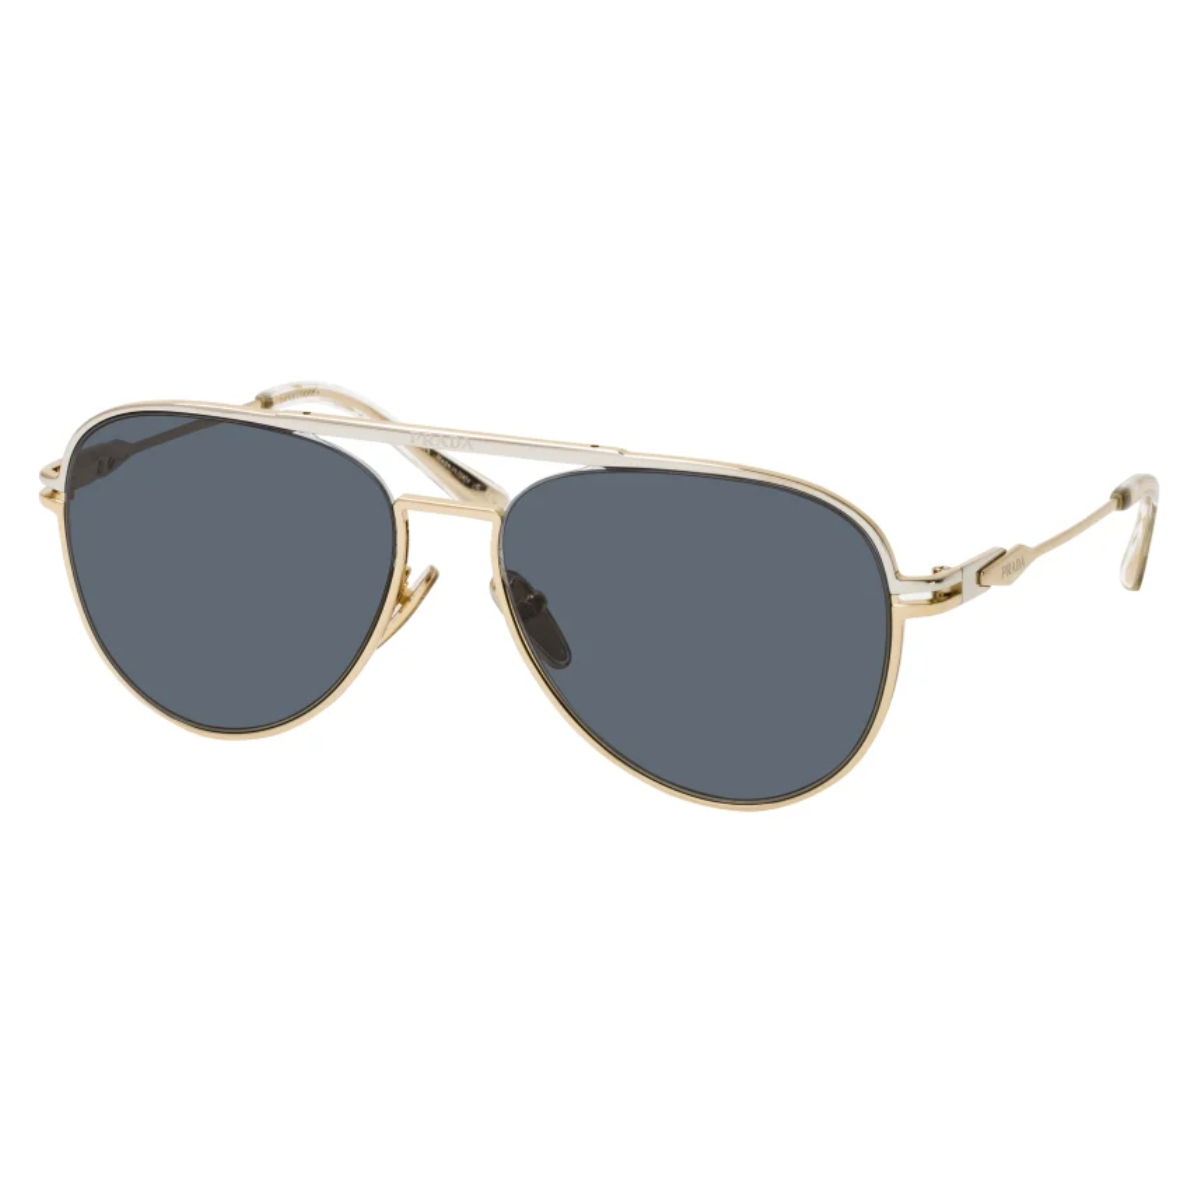 "Upgrade your style game with Prada SPR 54Z 17F 09T Gold aviator sunglasses for men from Optorium. Explore our range of cool and stylish shades, including top brands like Prada and Ray Ban."